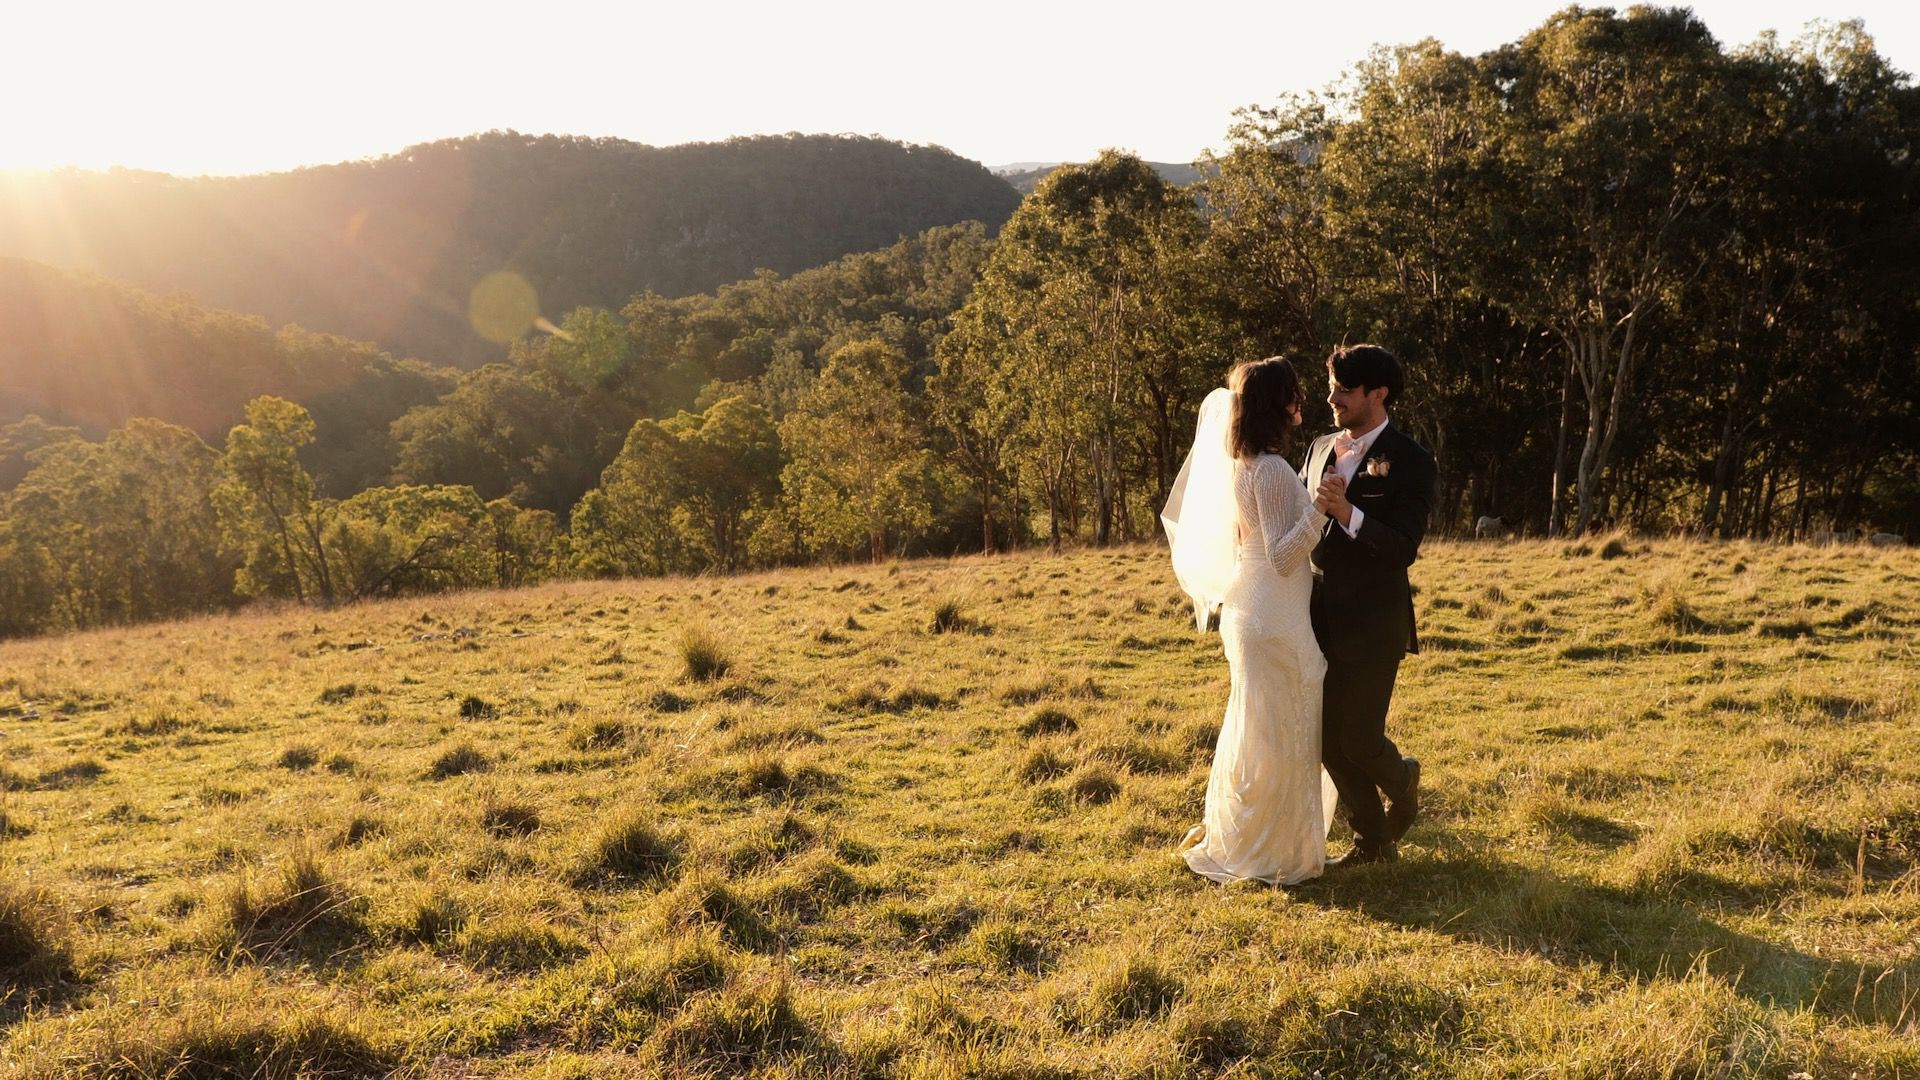 Newlyweds hugging and posing for a photo - raw footage wedding videography services in the Blue Mountains and surrounding areas - Just Footage